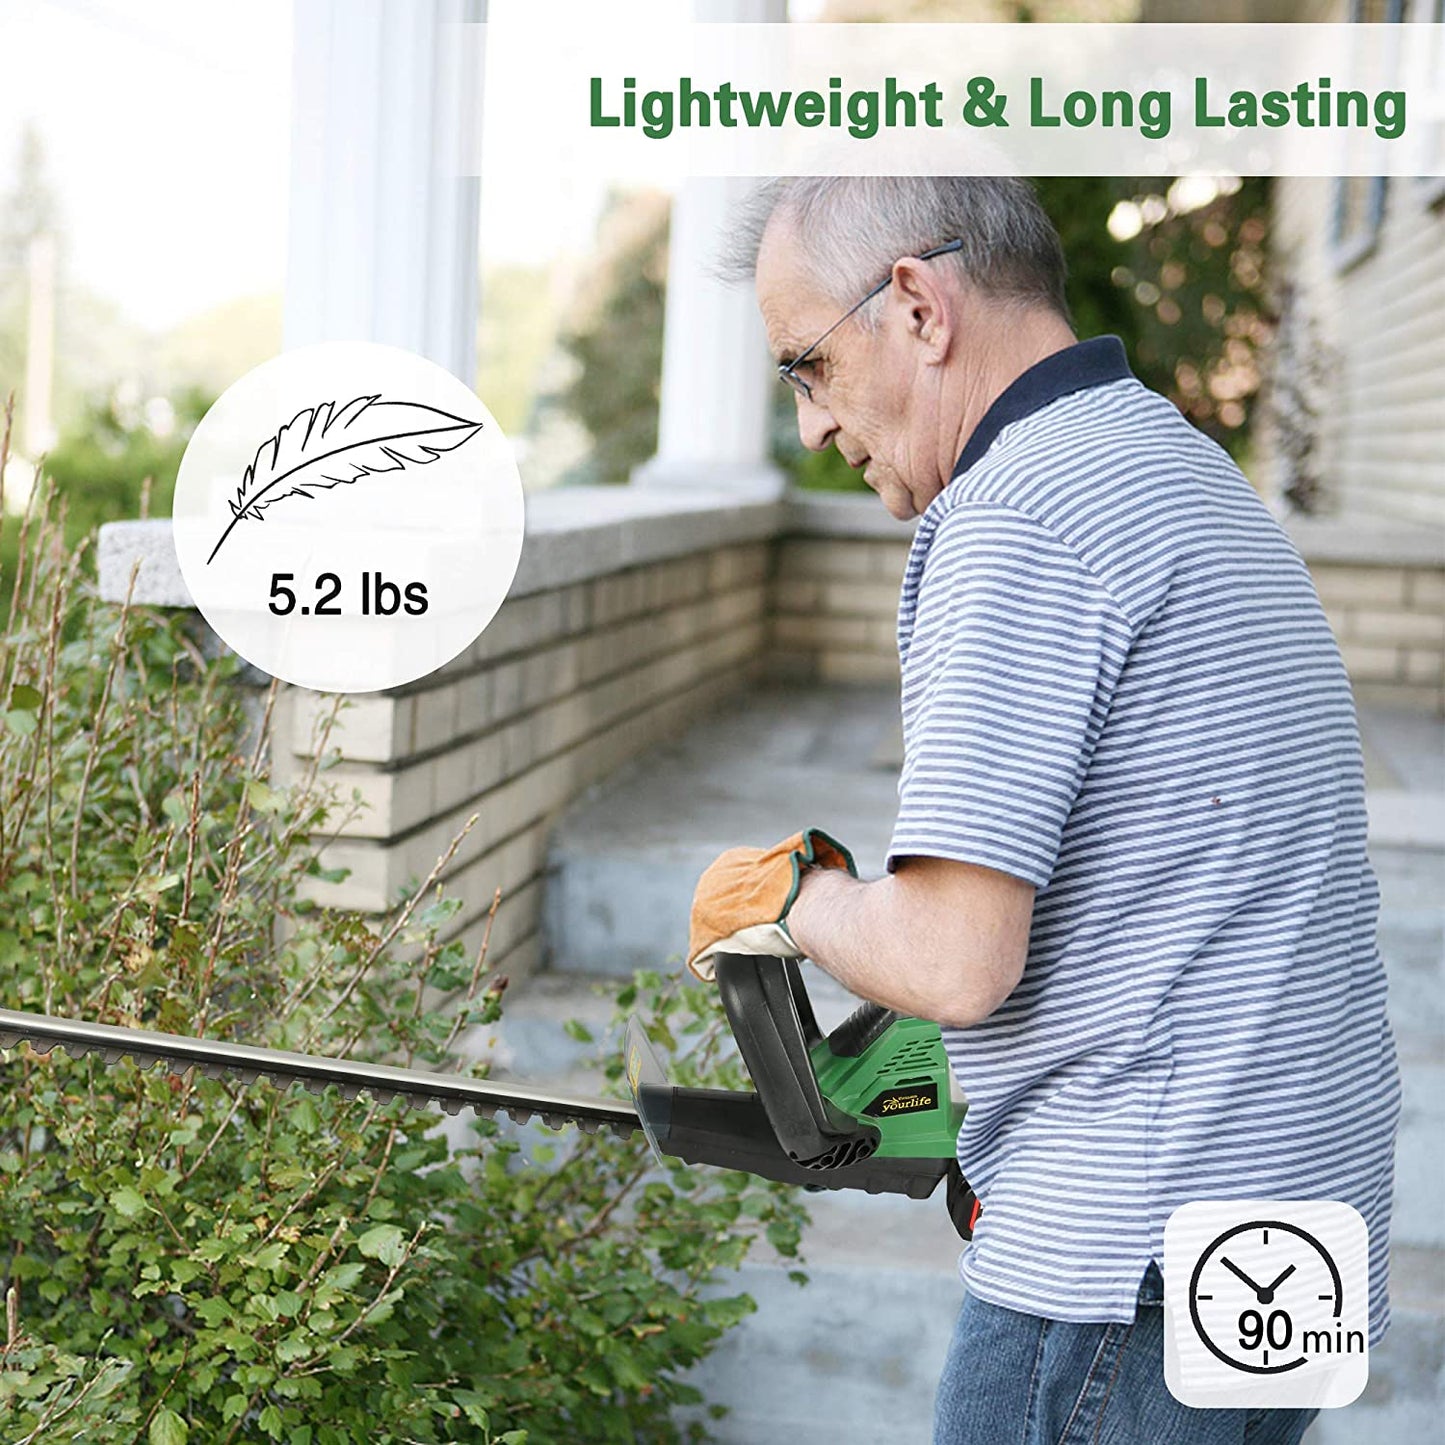 23-inch 20V Electric Hedge Trimmer Cordless, Light Weight & 90min Long-Lasting, Garden Hedge Trimmer w/Dual-Action Blade, Lawn Shrub Trimmer, 2.0Ah Li-Lon Battery & Fast Charger Included